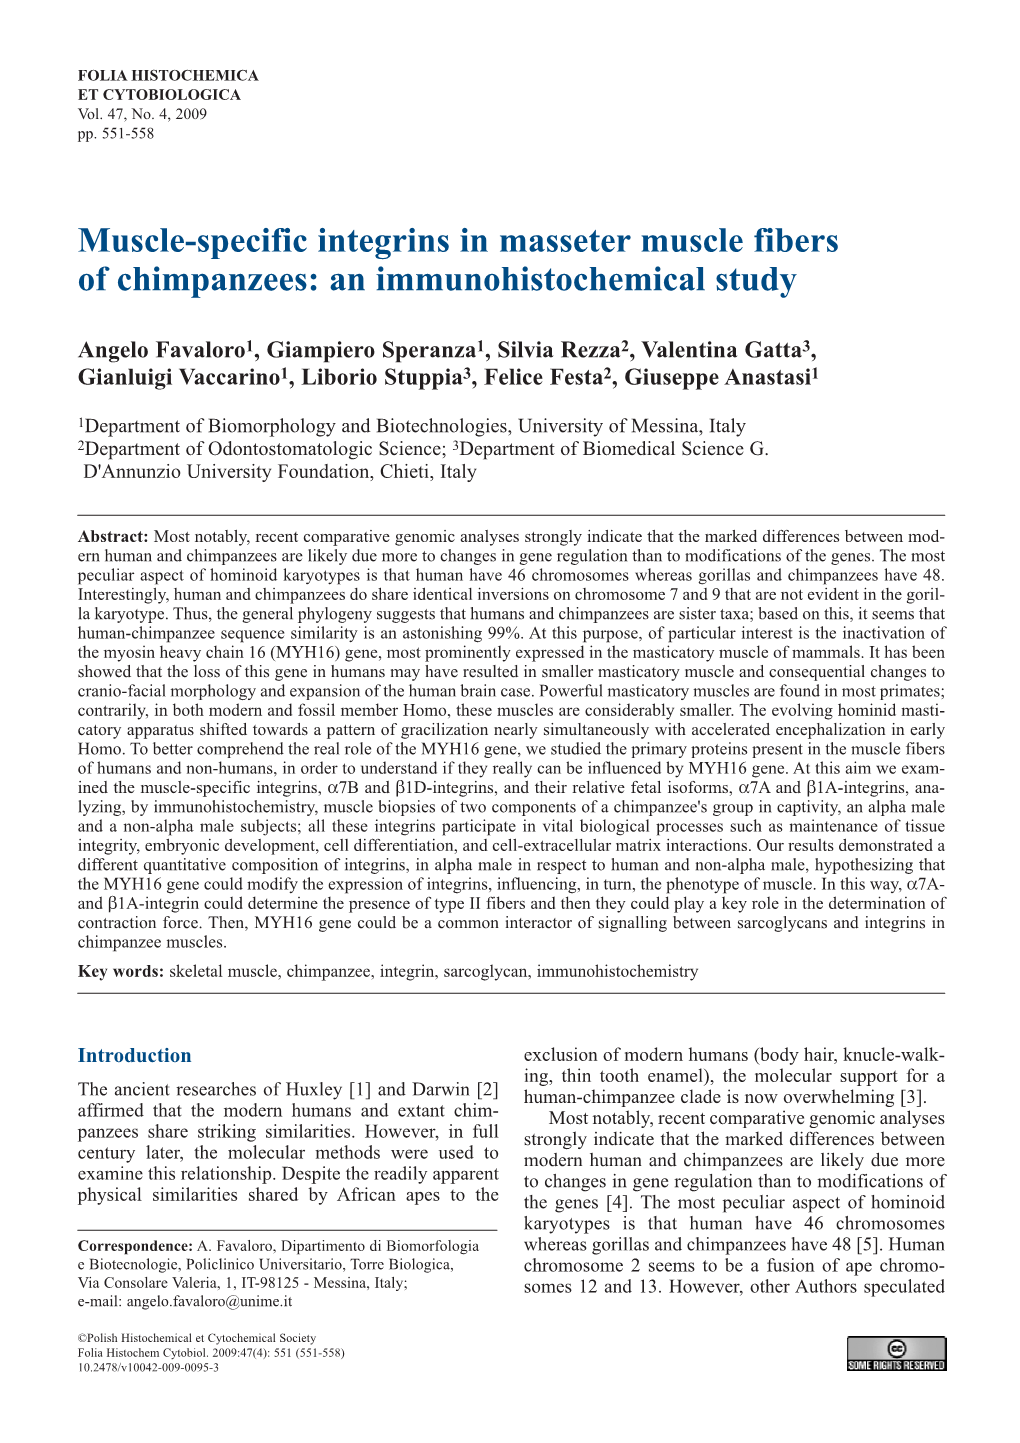 Muscle-Specific Integrins in Masseter Muscle Fibers of Chimpanzees: an Immunohistochemical Study